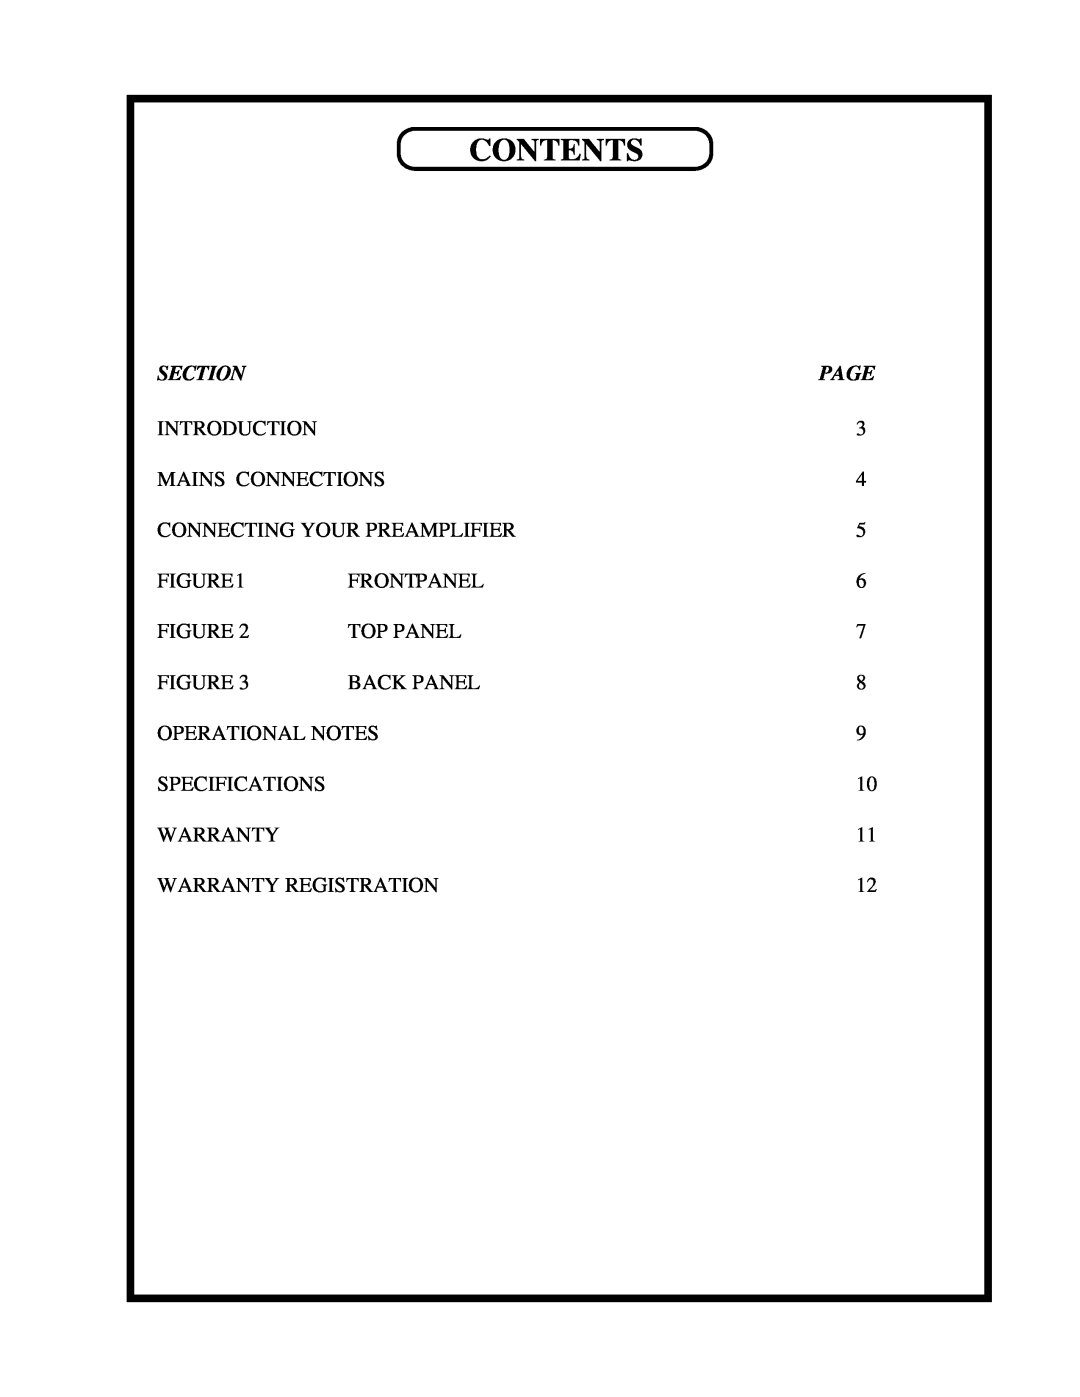 Manley Labs 300B owner manual Contents, Section, Page 